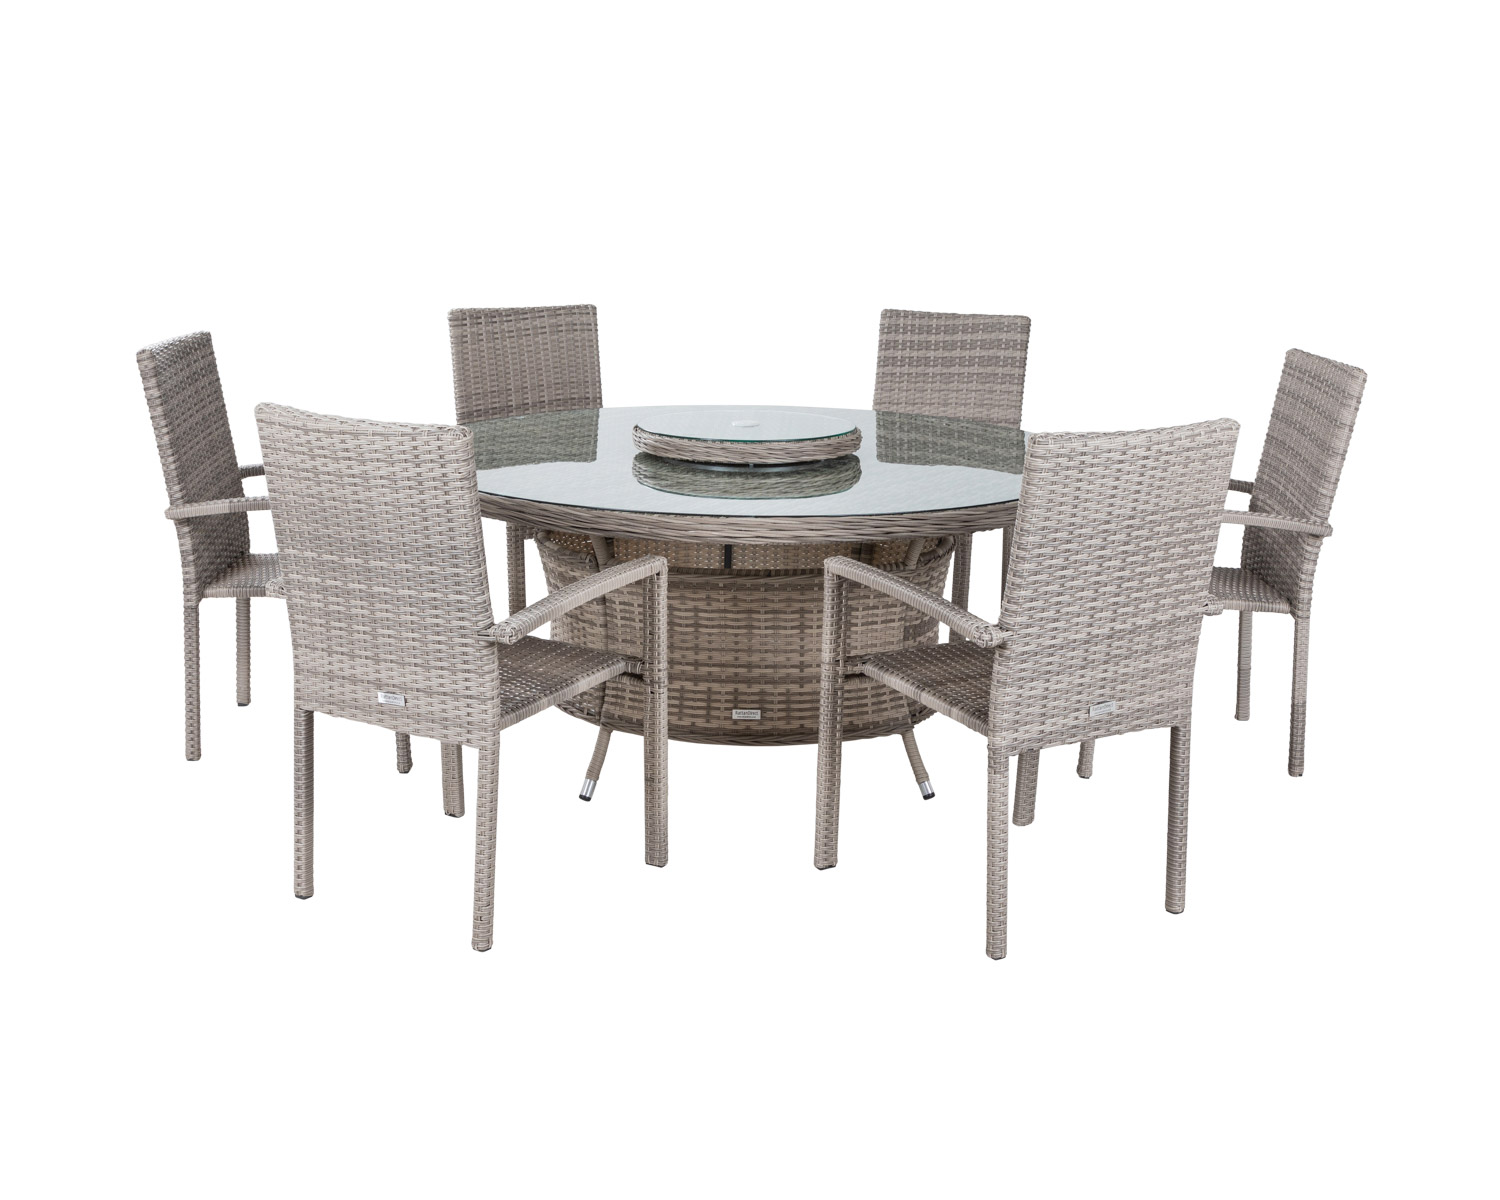 6 Seat Rattan Garden Dining Set With Large Round Table In Grey Rio Rattan Direct